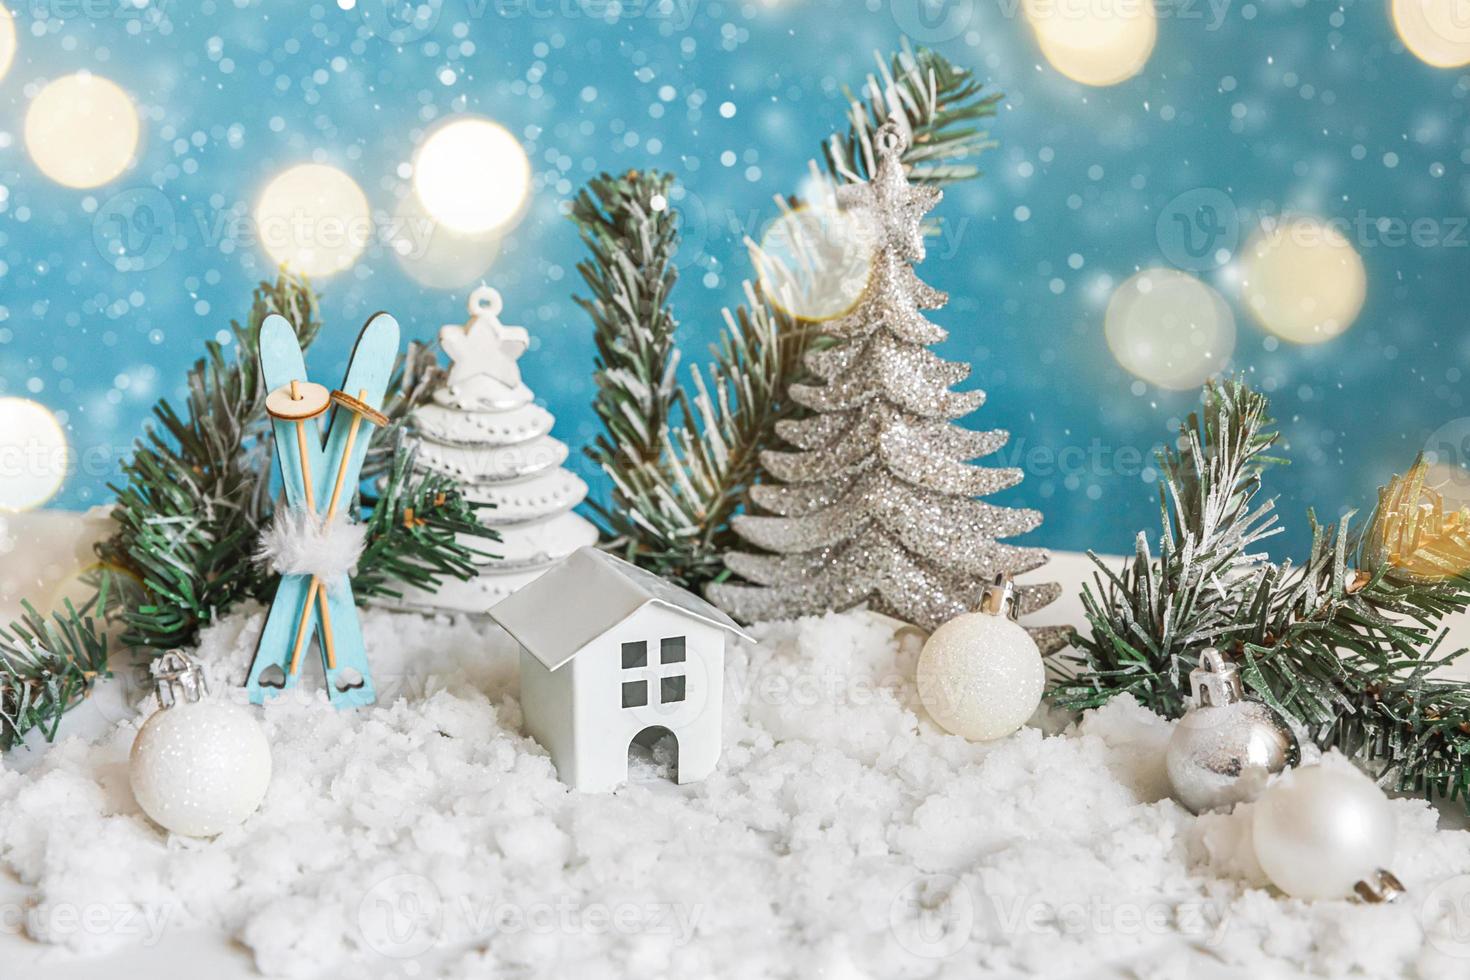 Abstract Advent Christmas Background. Toy model house and winter decorations ornaments on blue background with snow and defocused garland lights. Christmas with family at home concept. photo